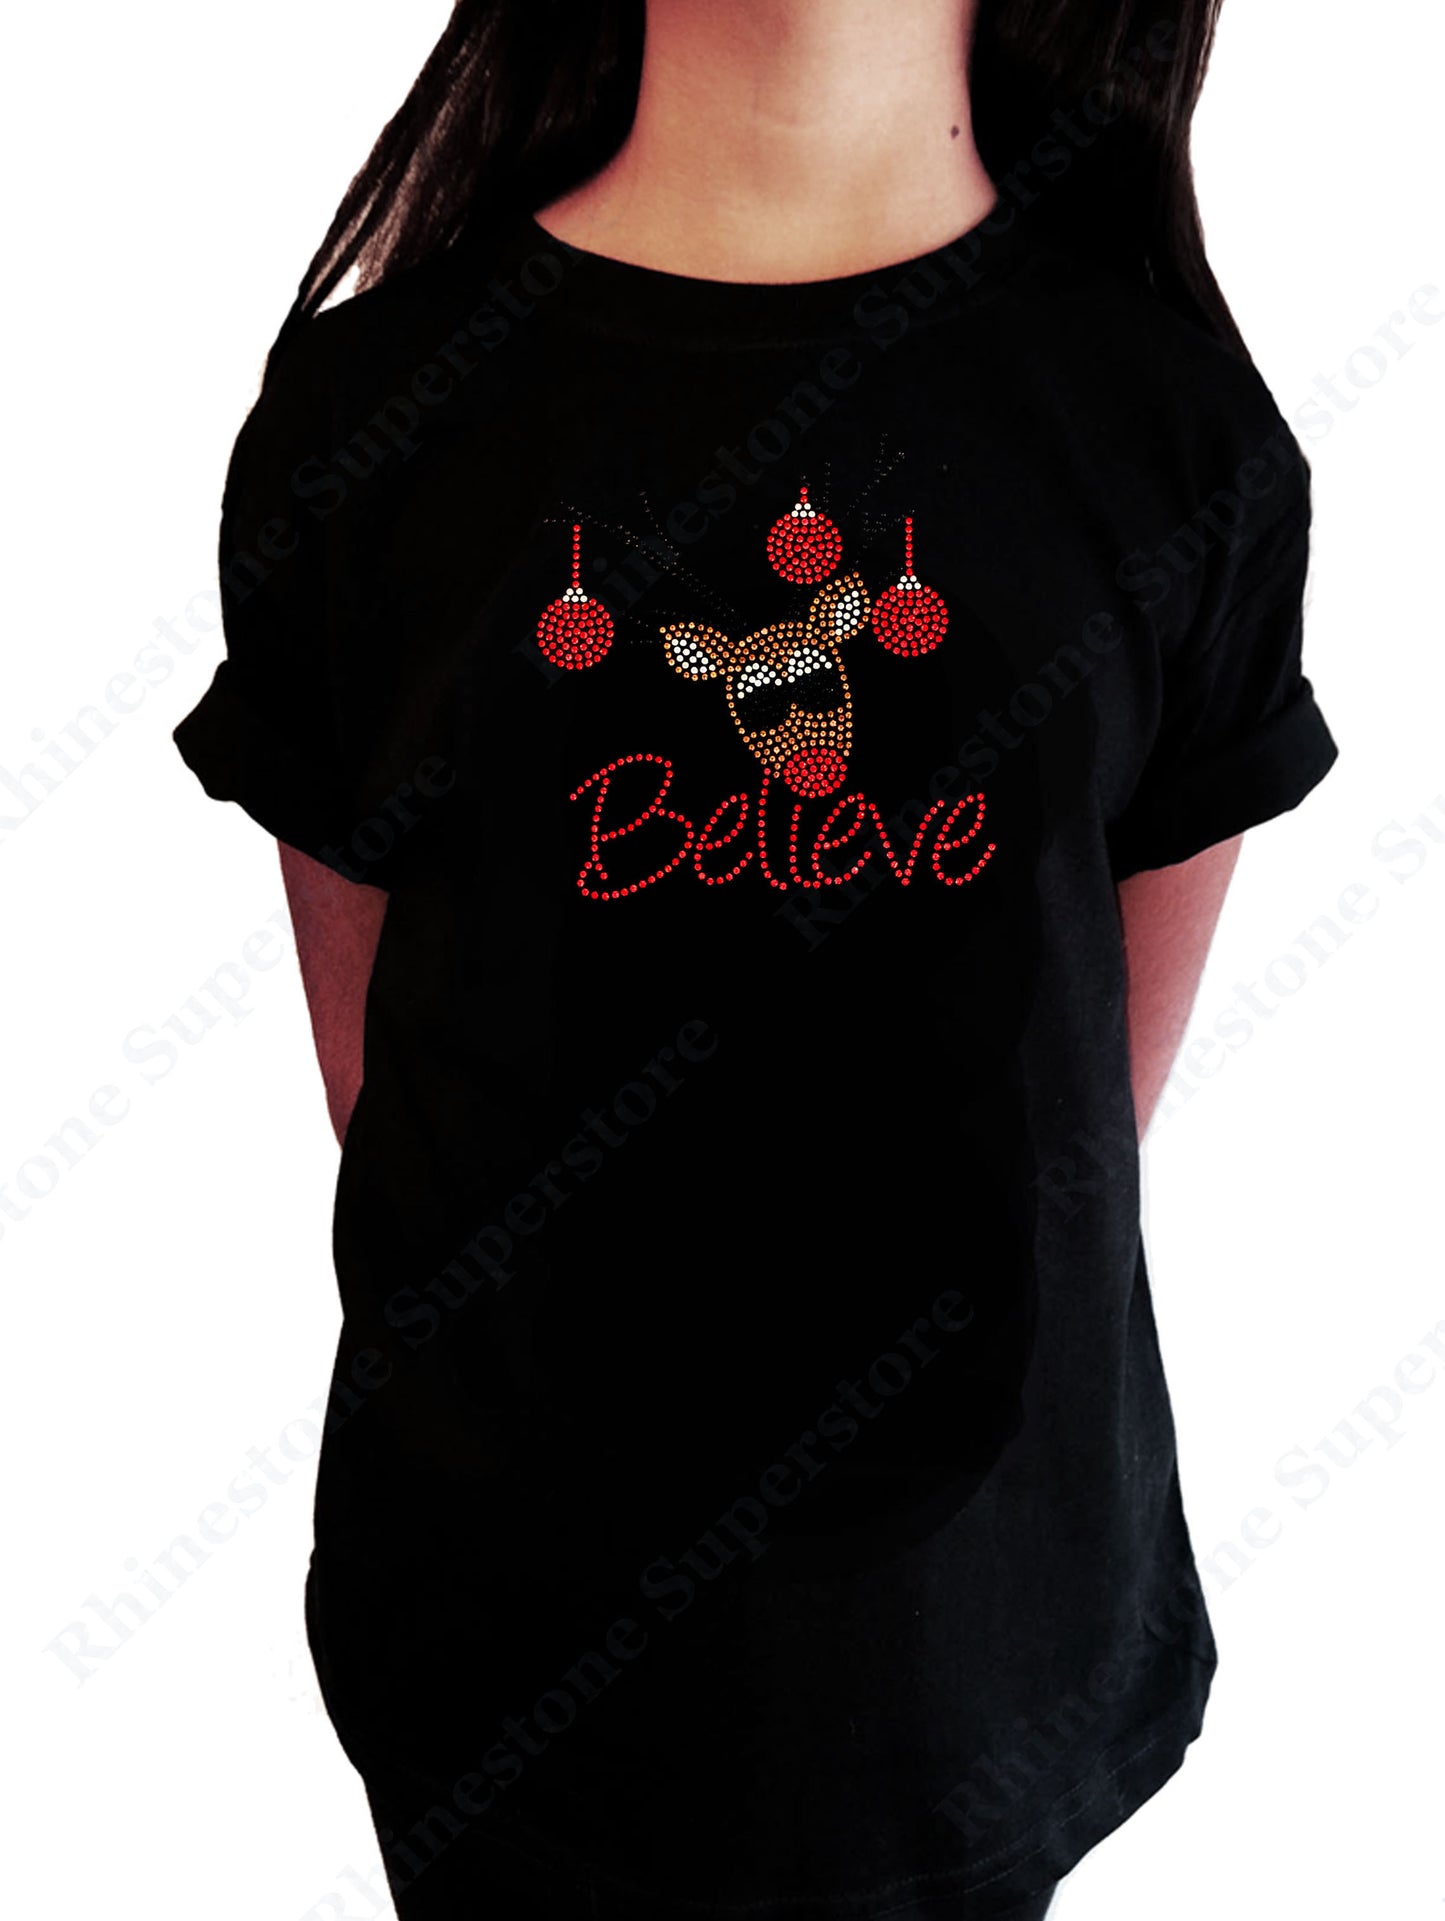 Girls Rhinestud T-Shirt " Believe Reindeer " Kids Size 3 to 14 Available